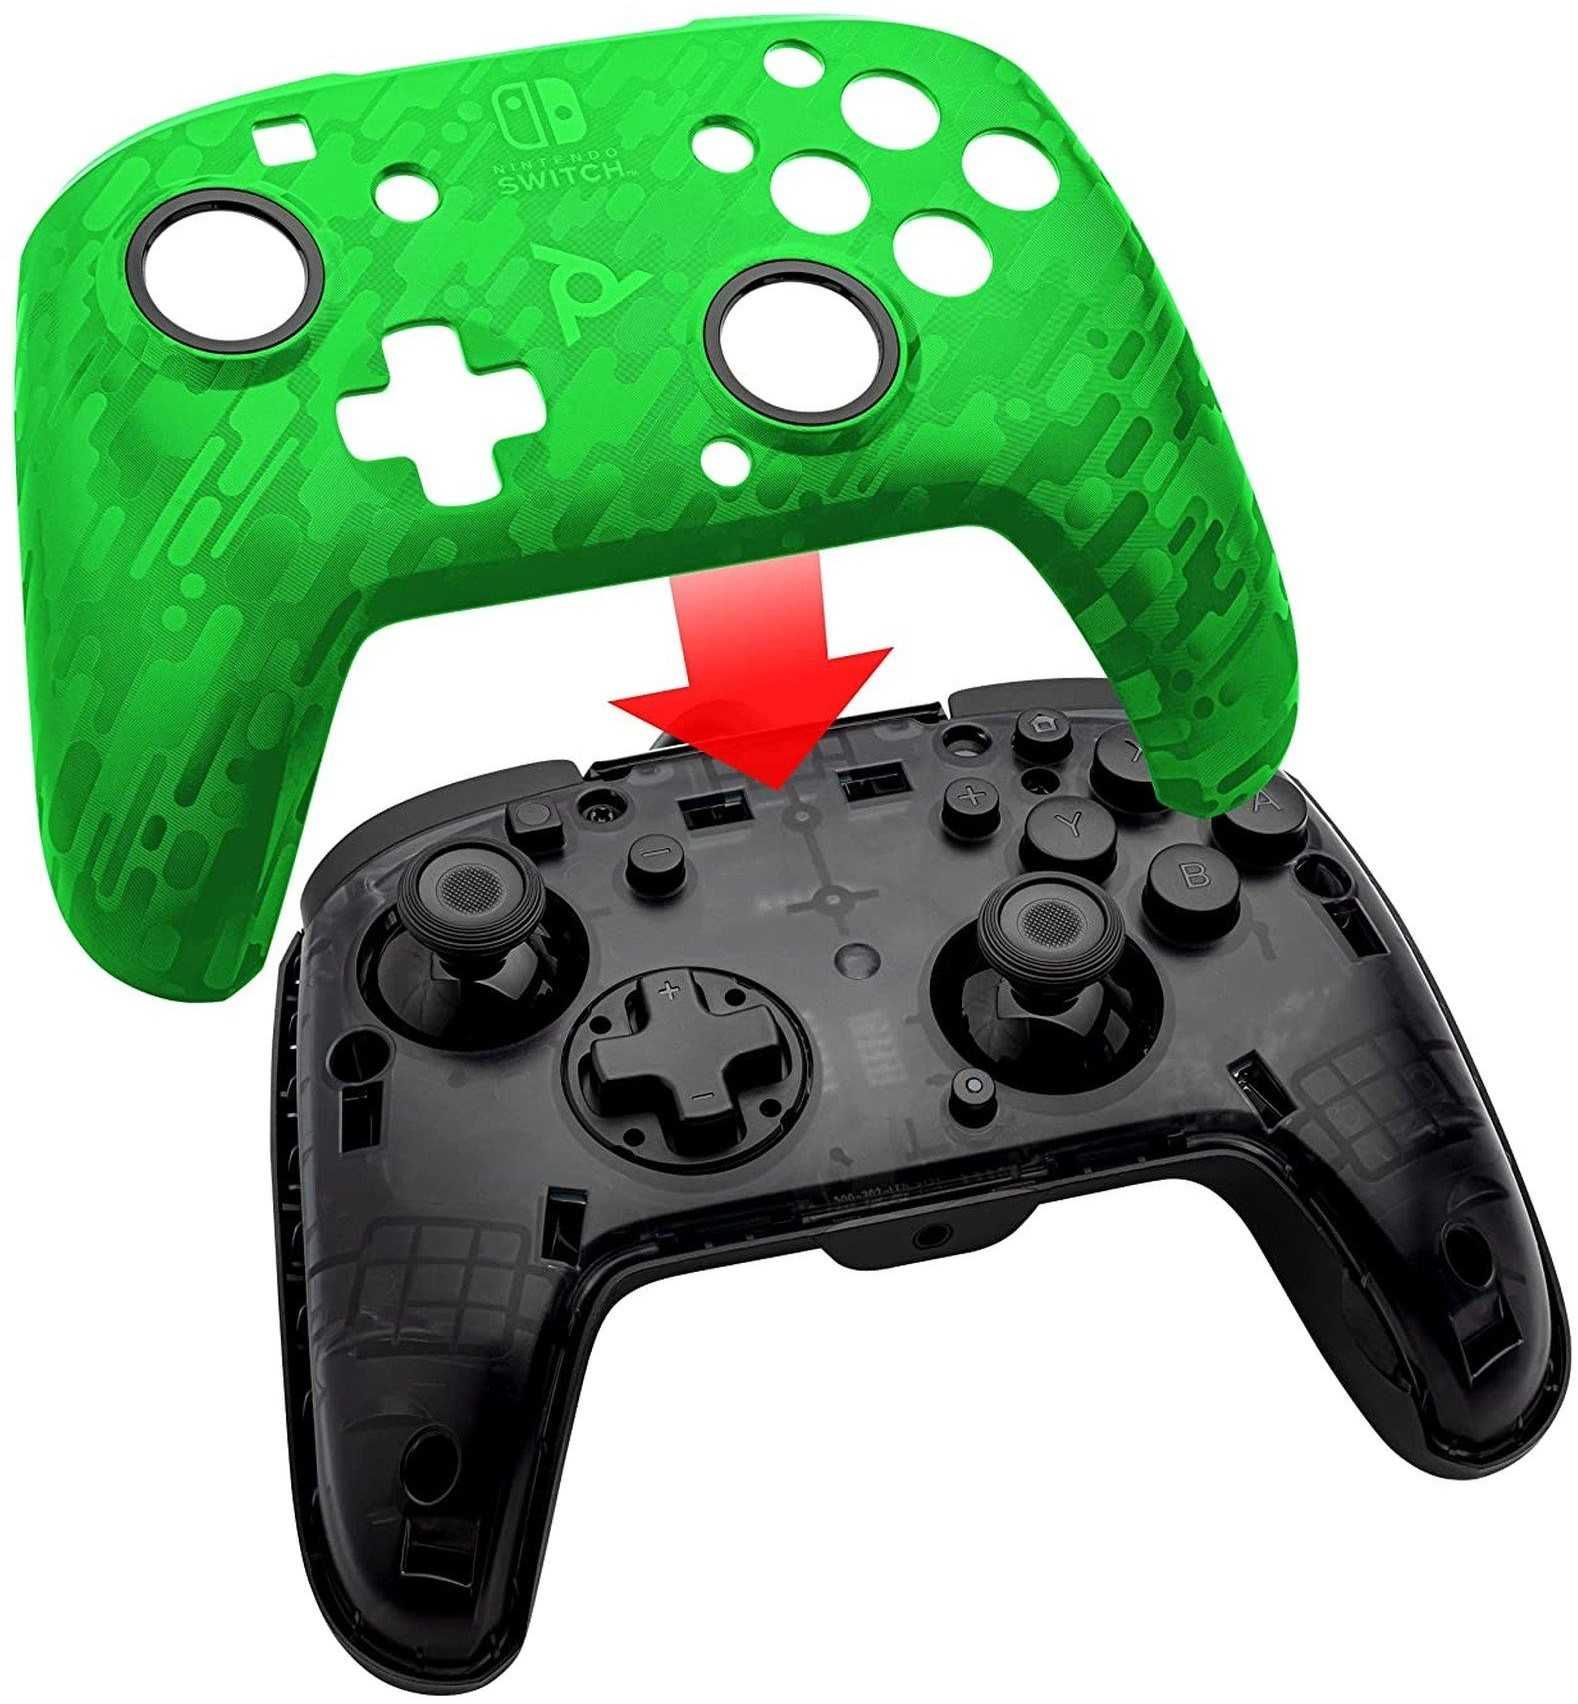 PDP SWITCH GamePad FACEOFF Delux Audio Camo Zielony